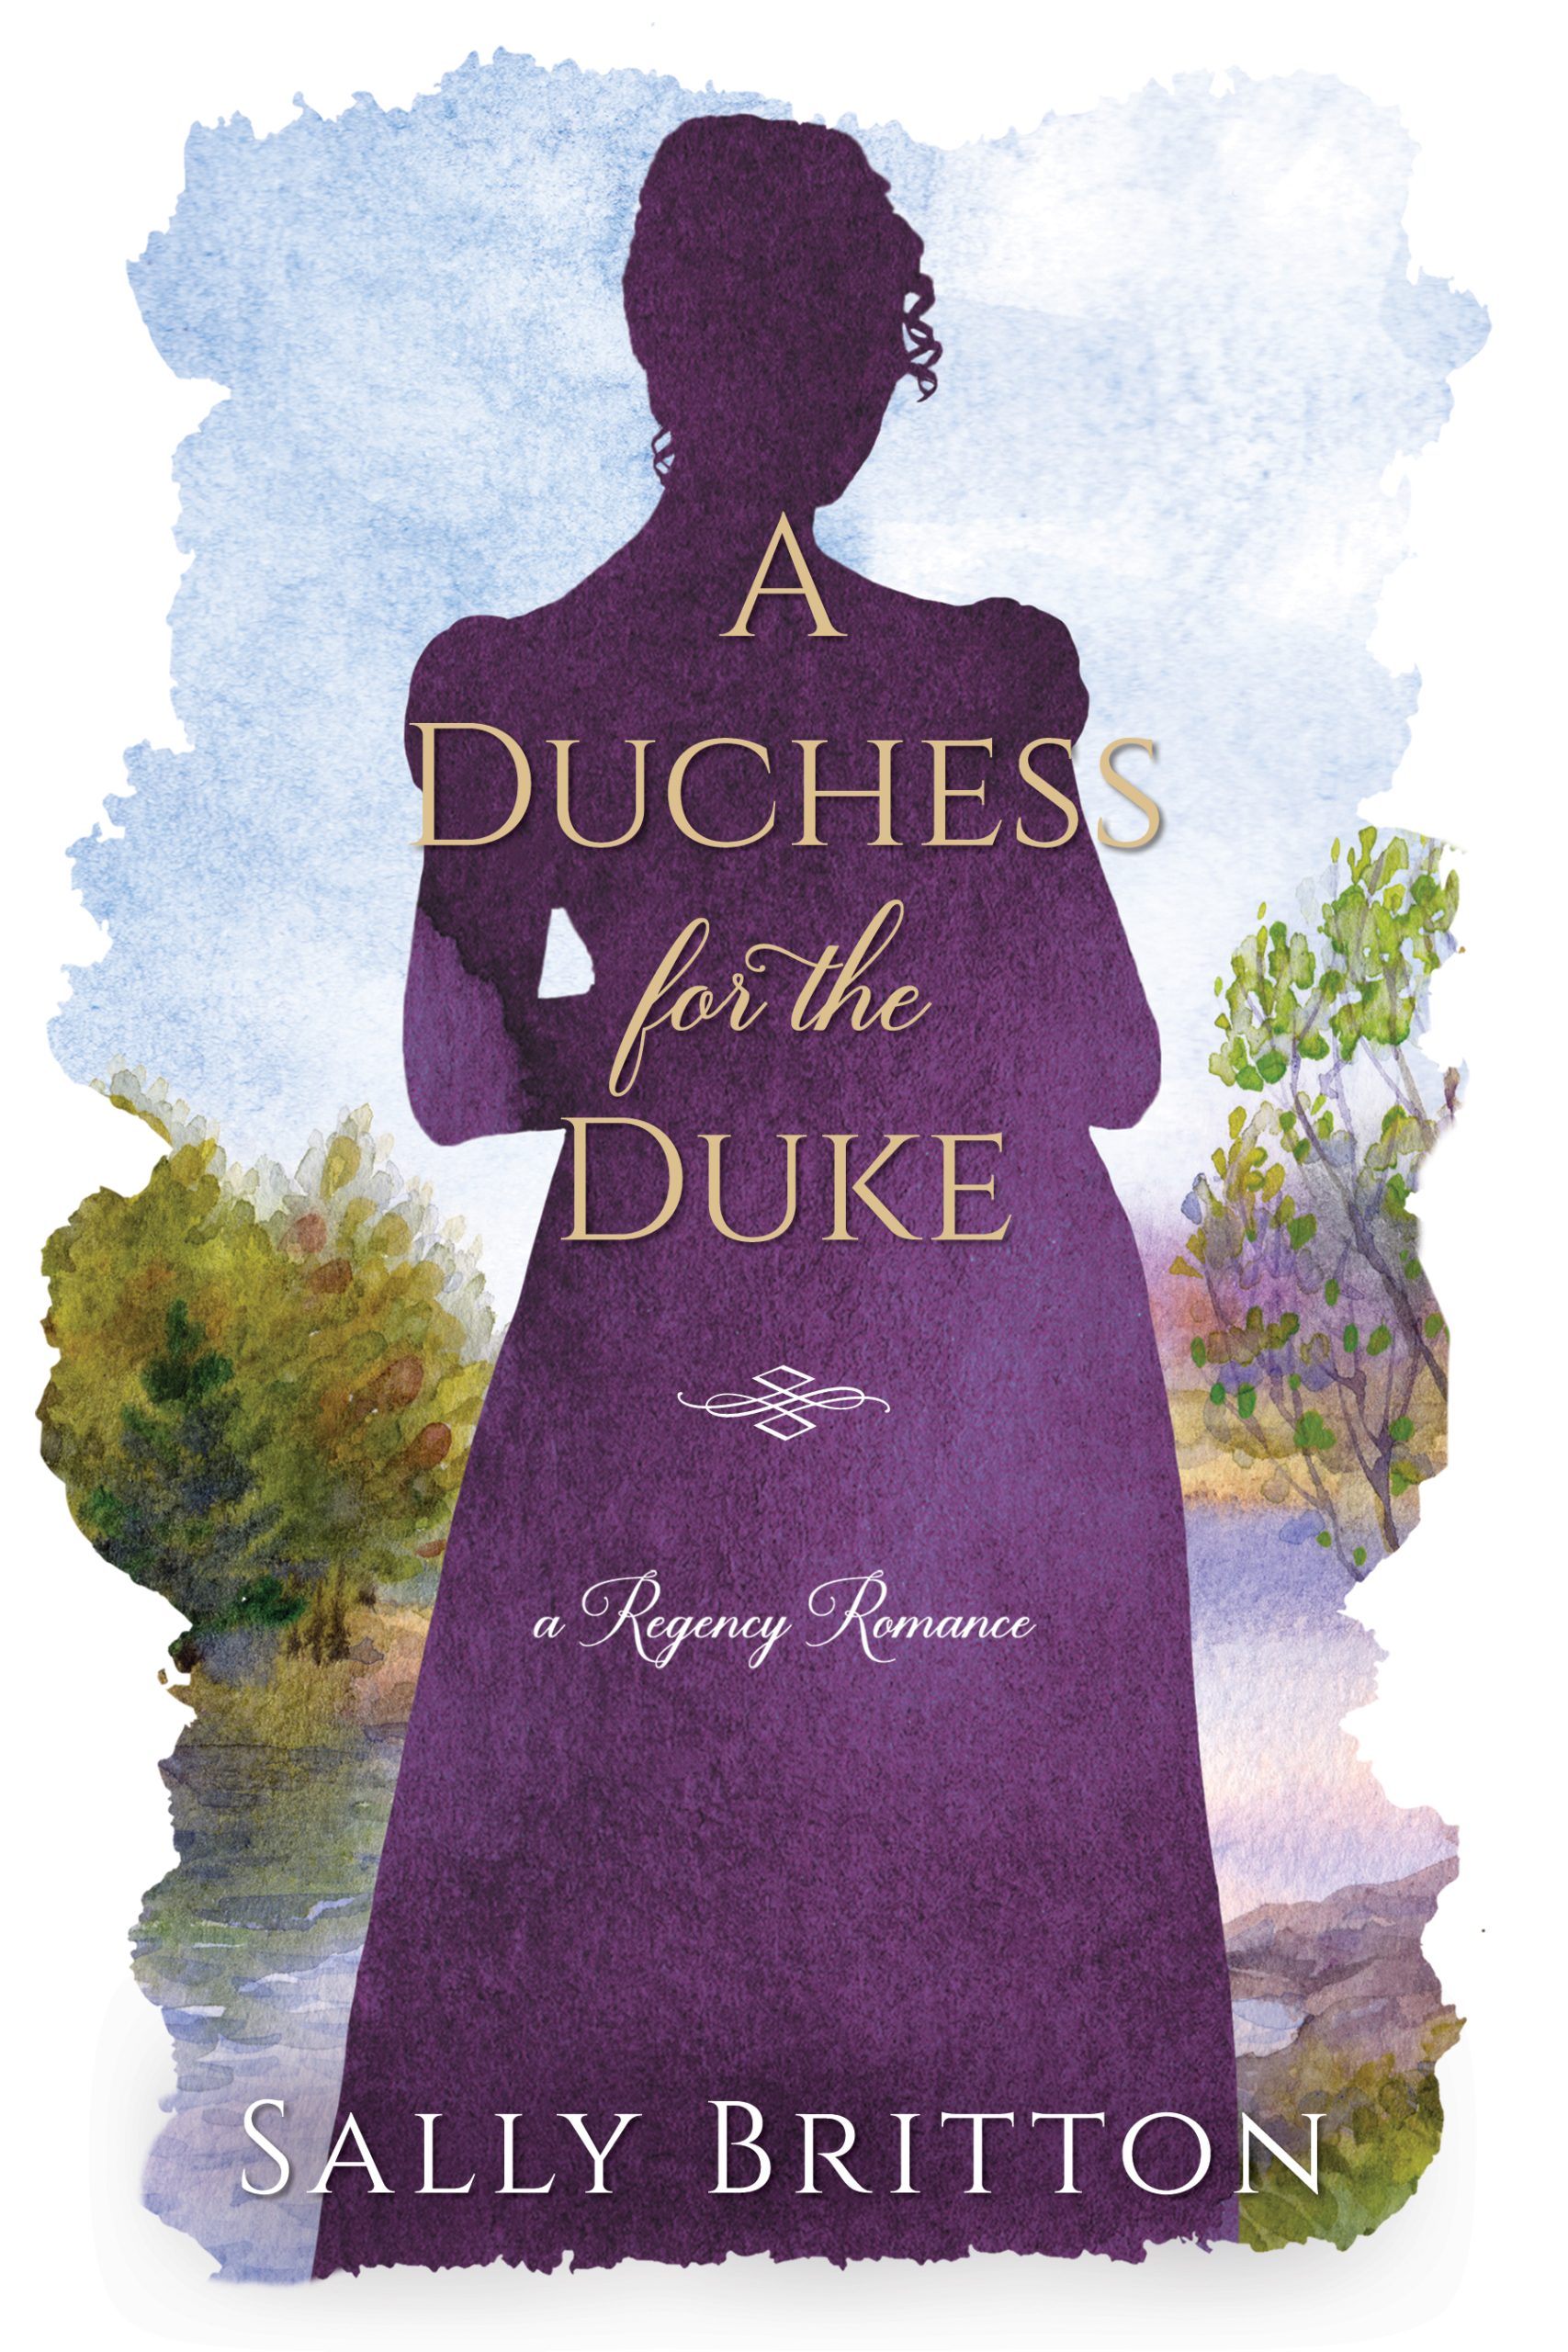 A Duchess for the Duke by Sally Britton PDF Download Audio Book